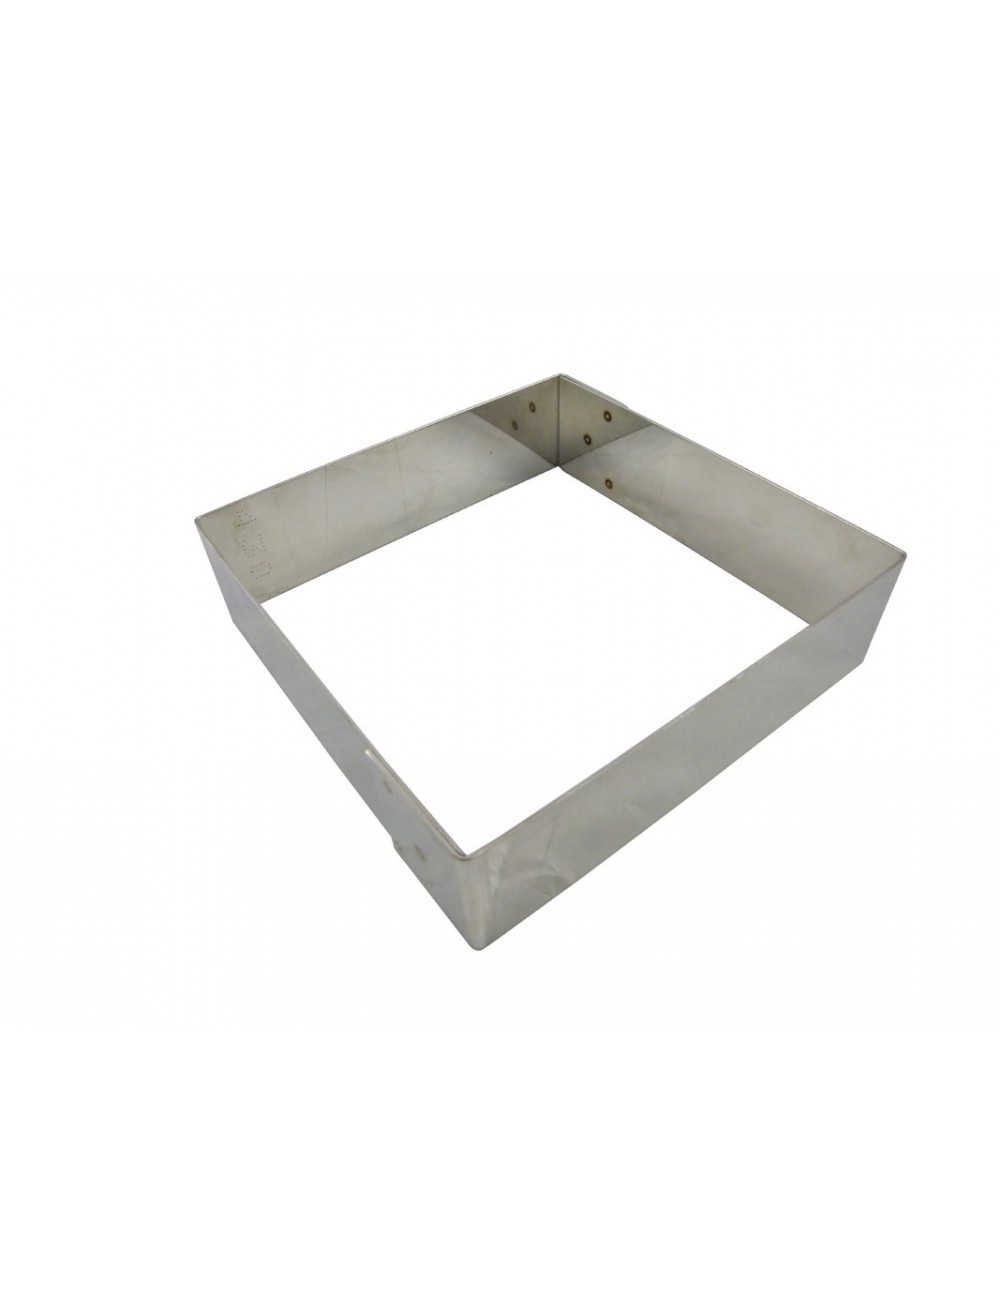 SQUARE MOUSSE FRAME - STAINLESS STEEL